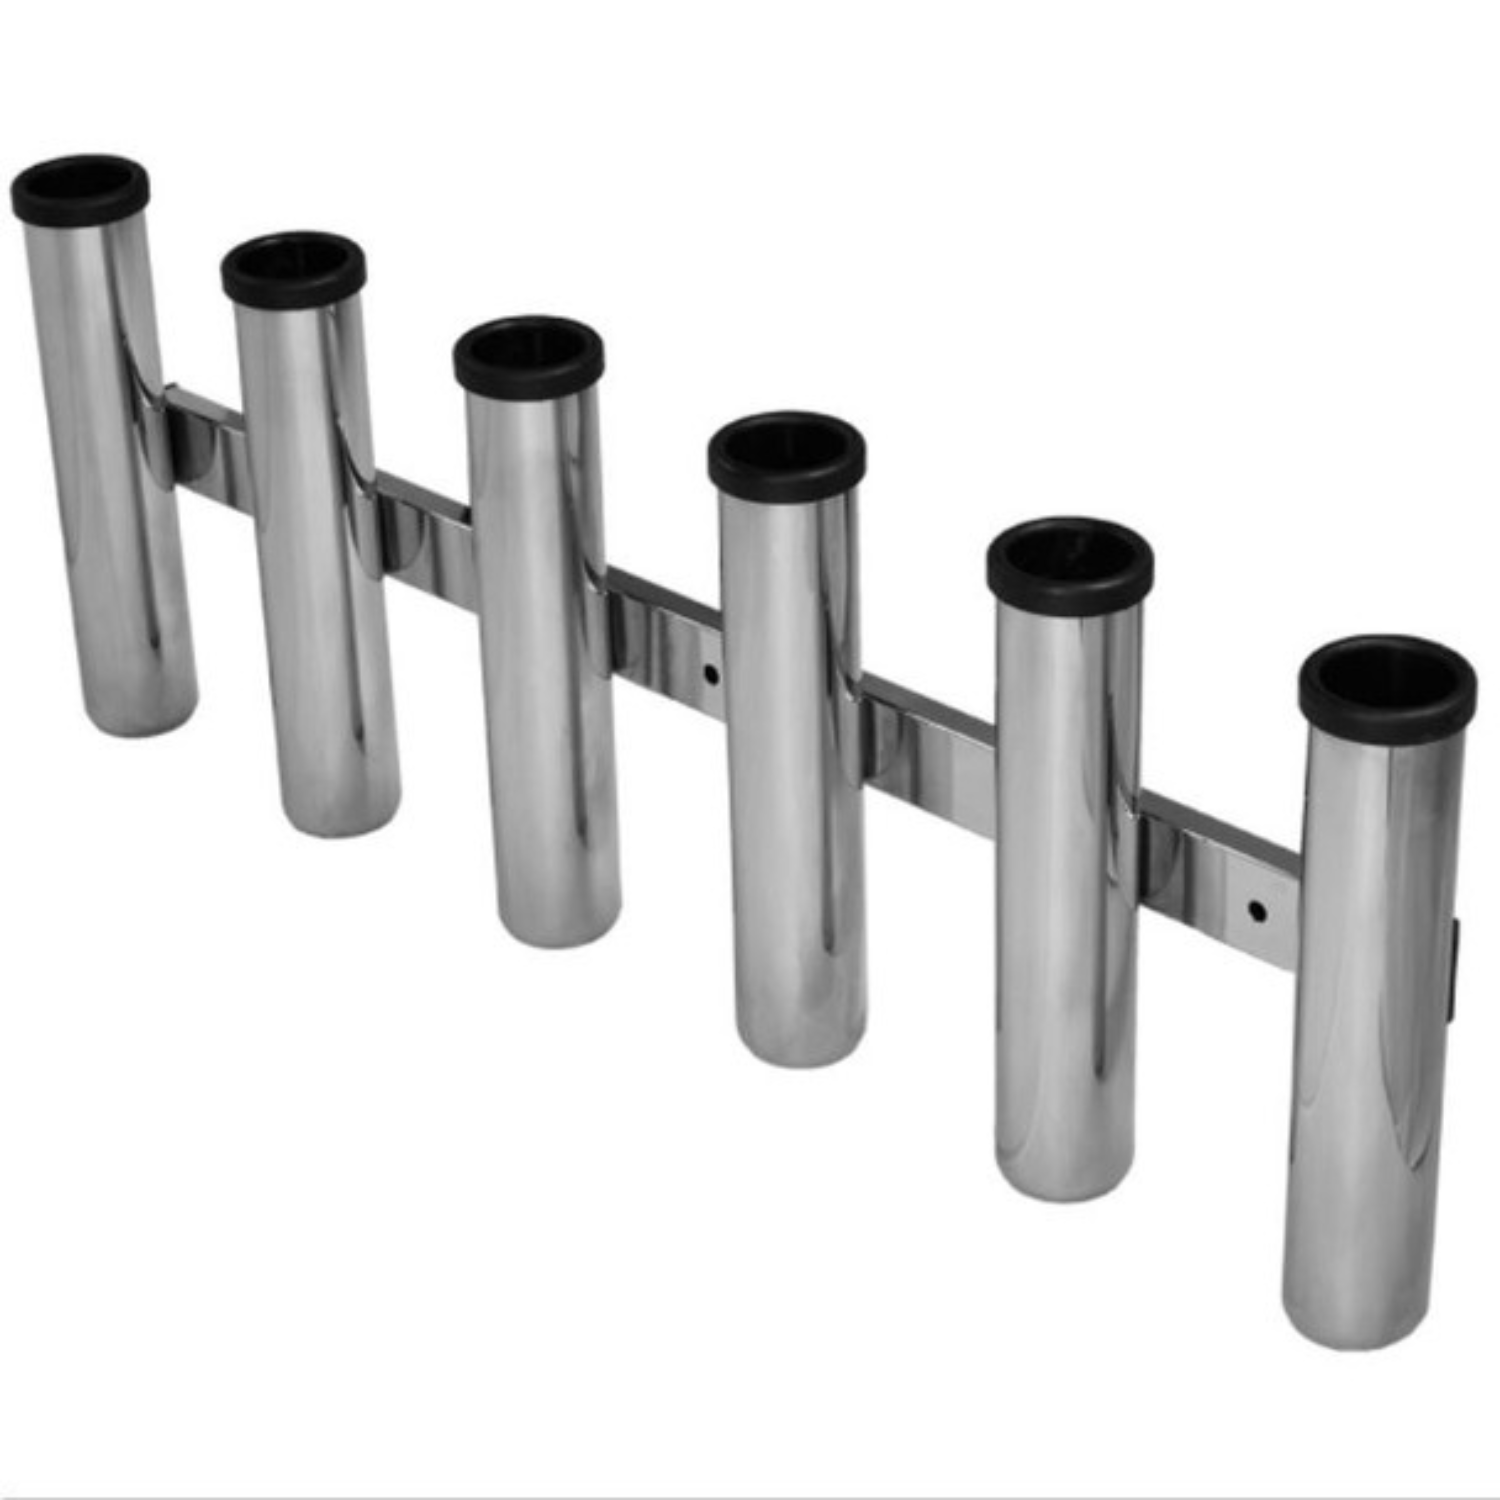 Deluxe Side Mount Rod Holder 6 Way Combing Rack 316 Stainless